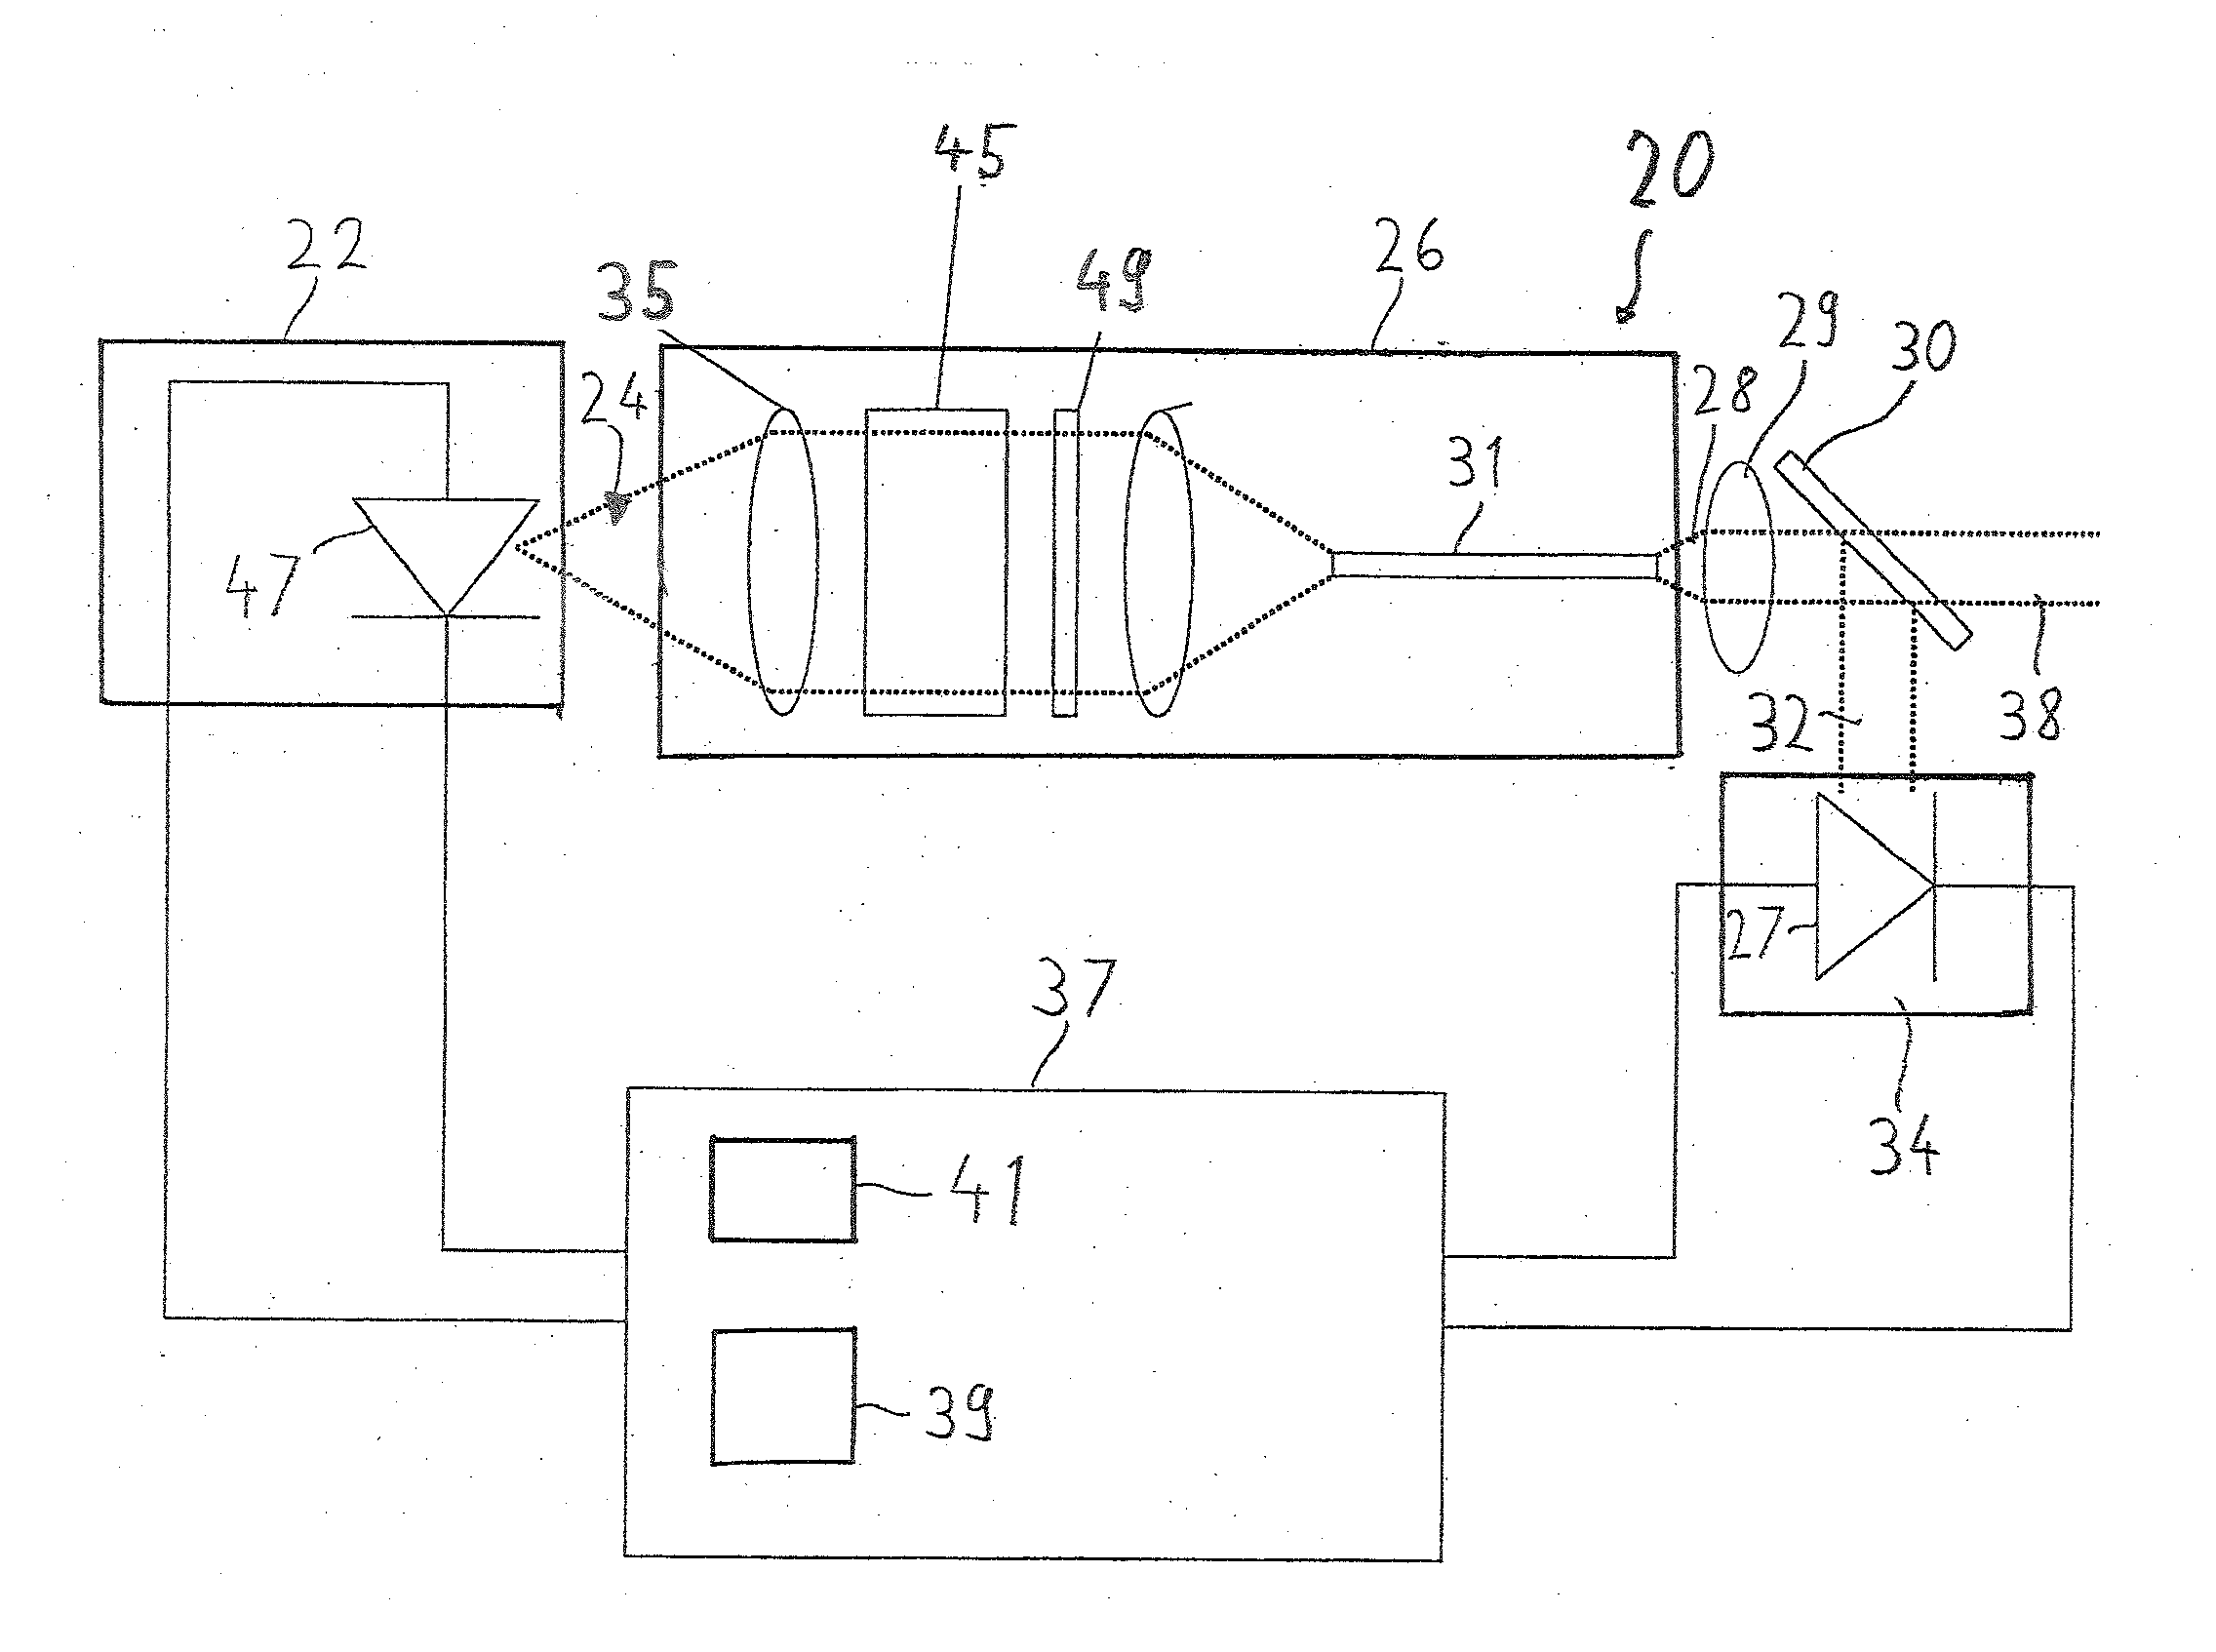 Laser system for a microscope and method for operating a laser system for a microscope